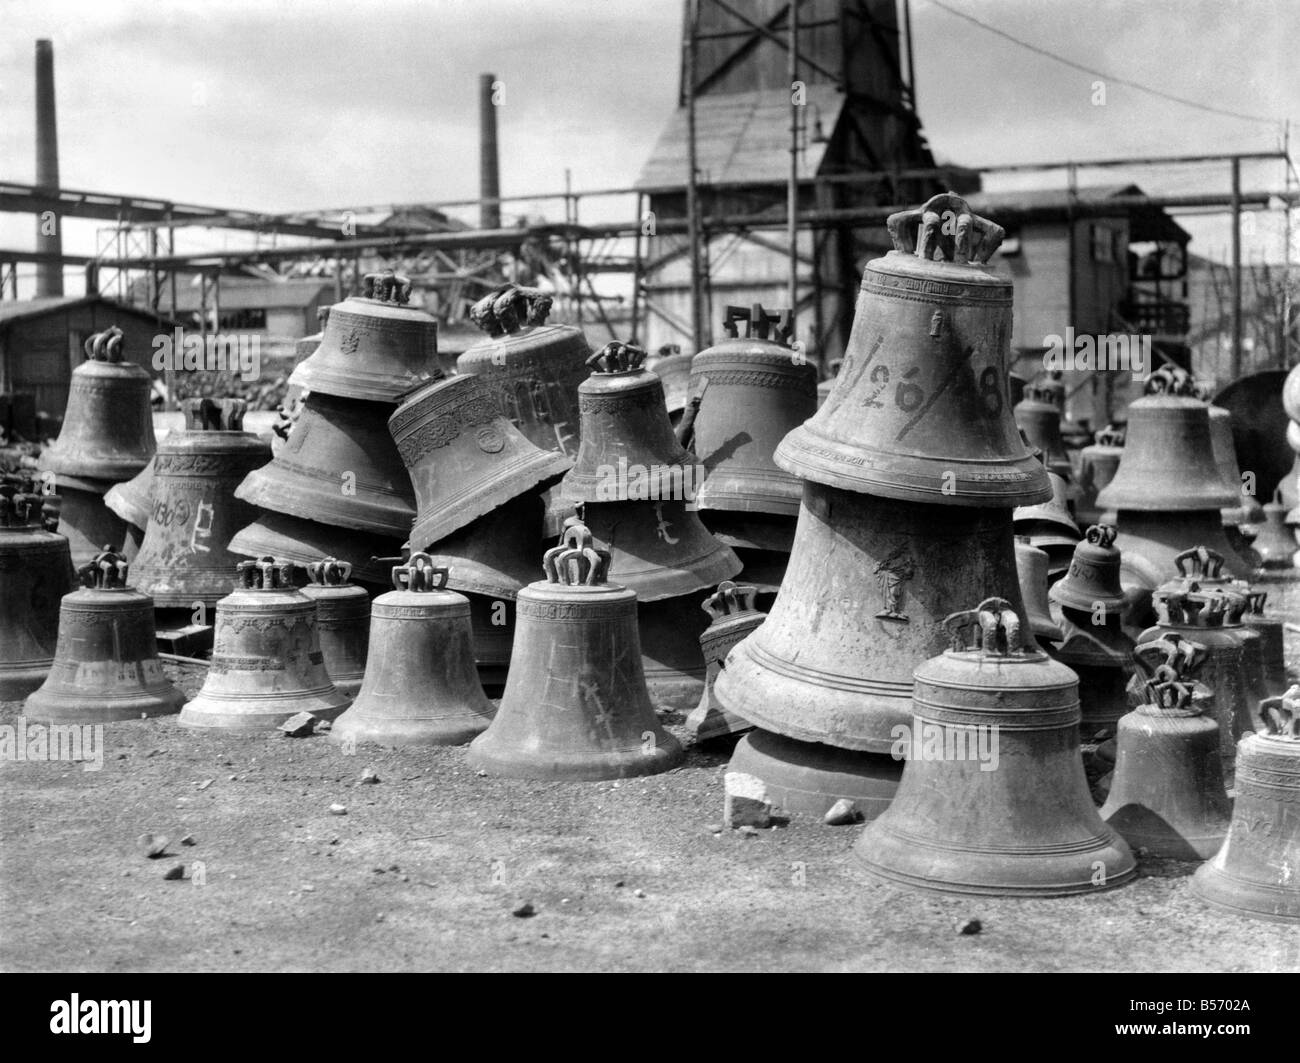 War salvage: Pictures taken in a German smelting yard at Hamburg which shows the shortage of German metal for Munitions. Here are Bronze statues and Church Bells collected from occupied countries piled in a heap ready for smelting irrespective of their value. The end of the war may save some of the more valuable ones. June 1945 P010152 Stock Photo